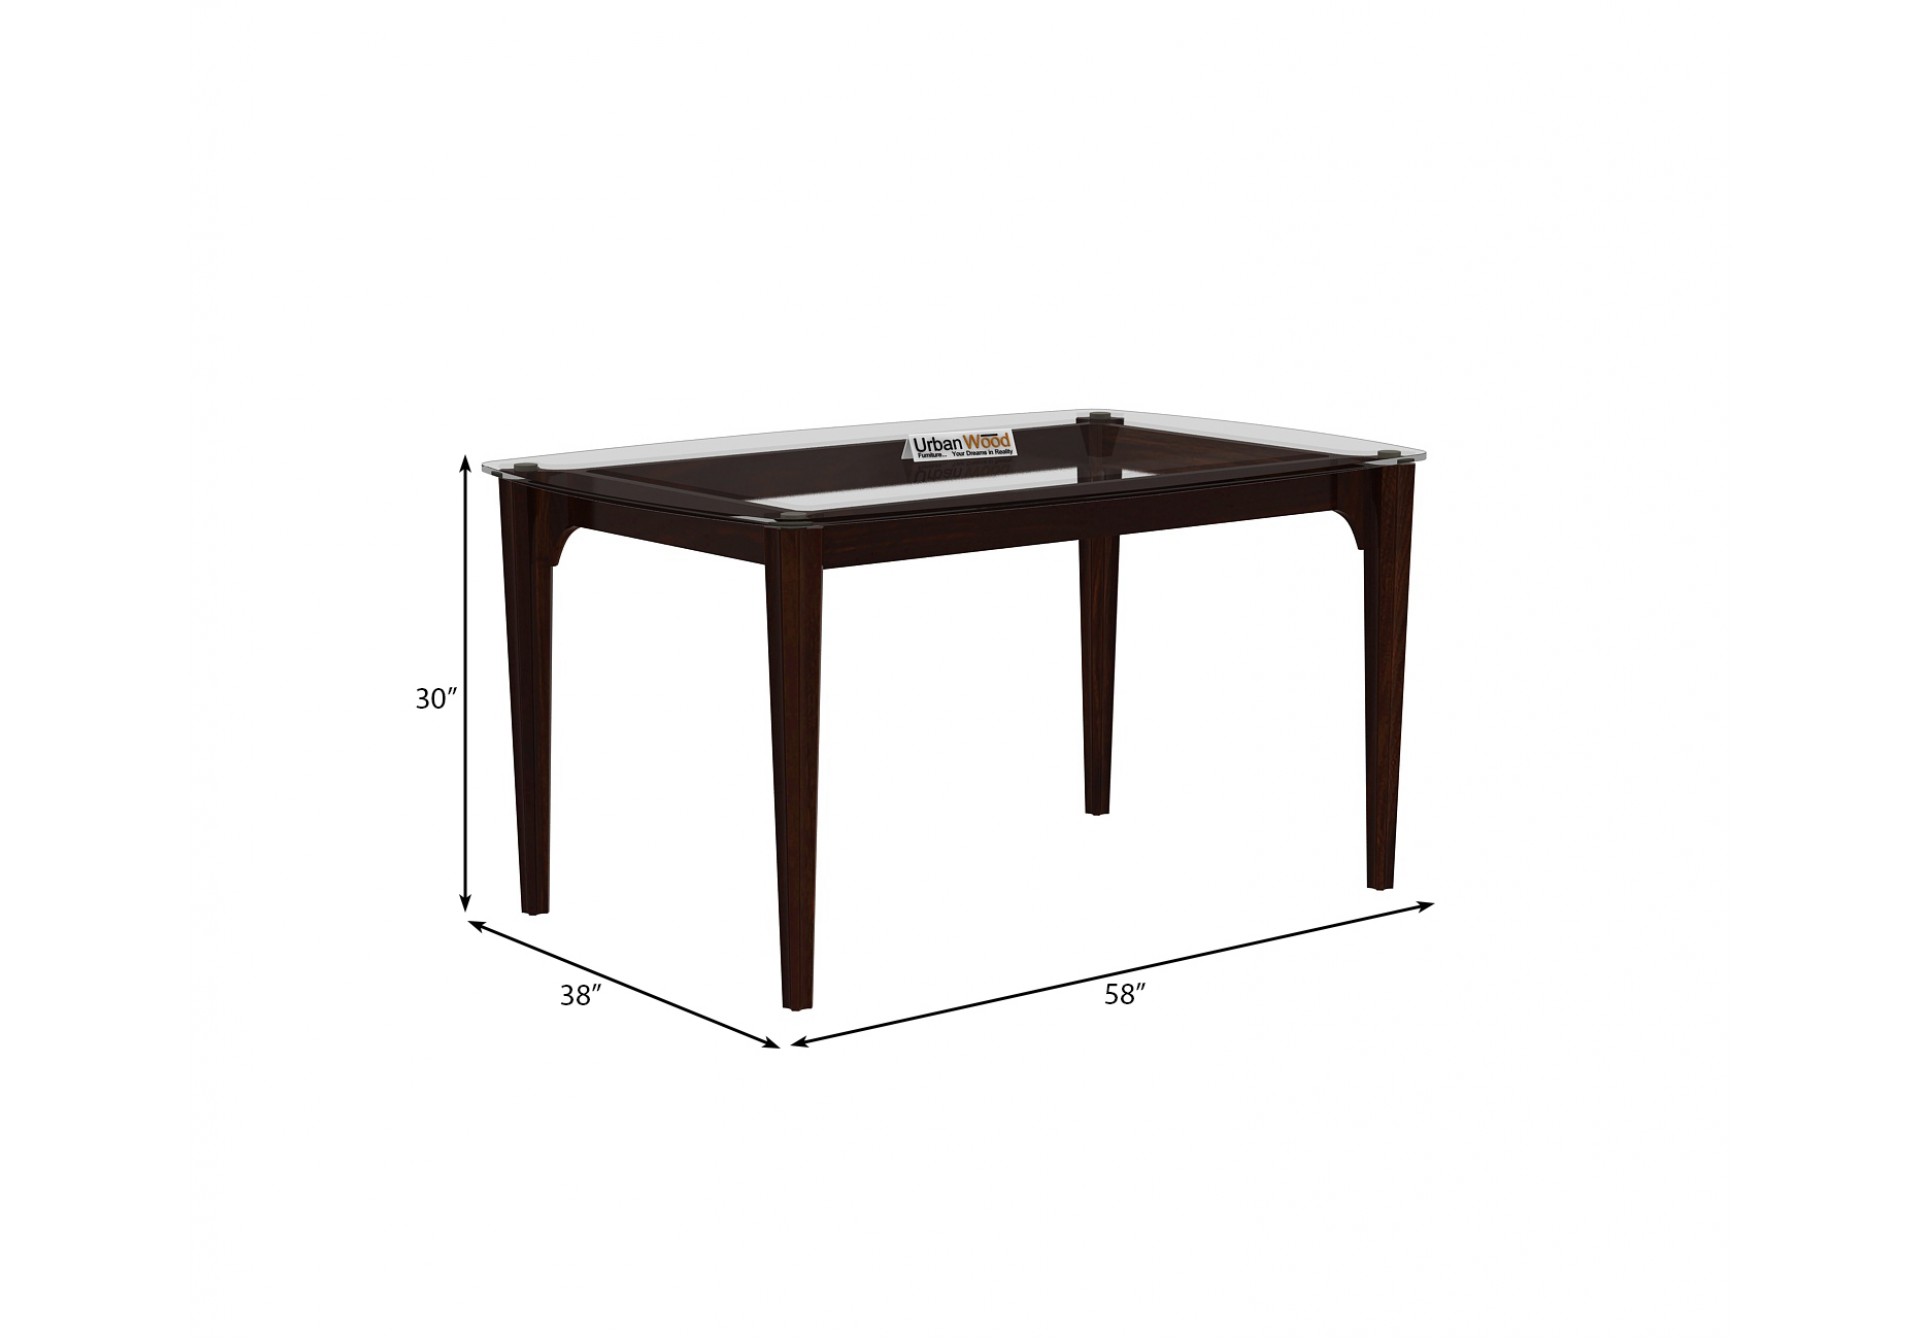 Quipo 4-Seater Dining Table 